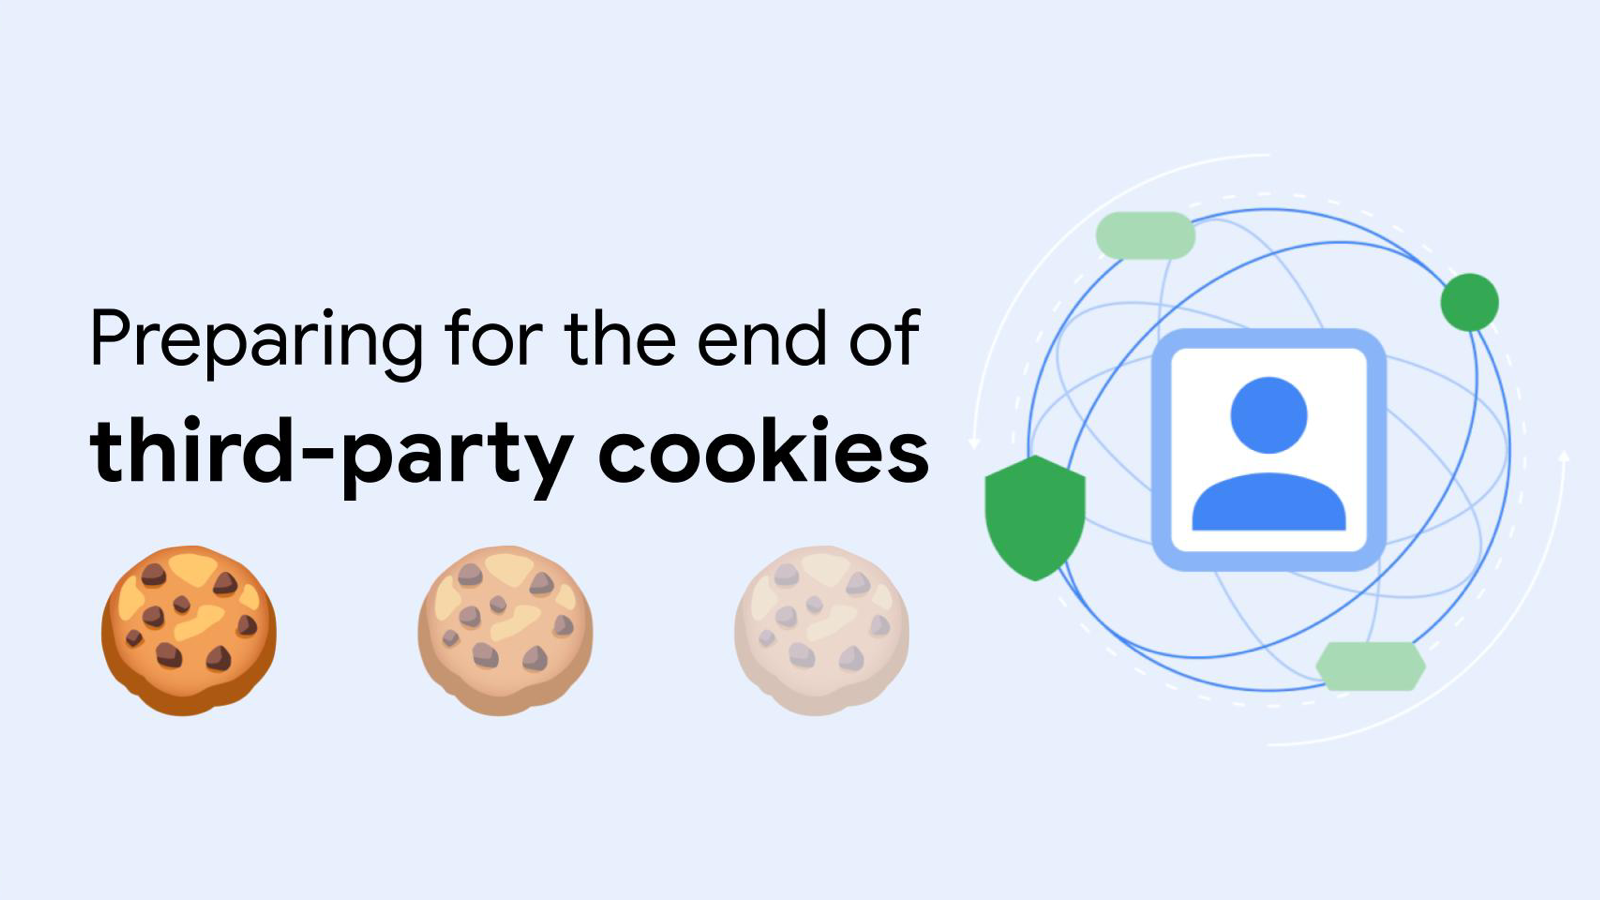 Preparing for the end of third-party cookies.